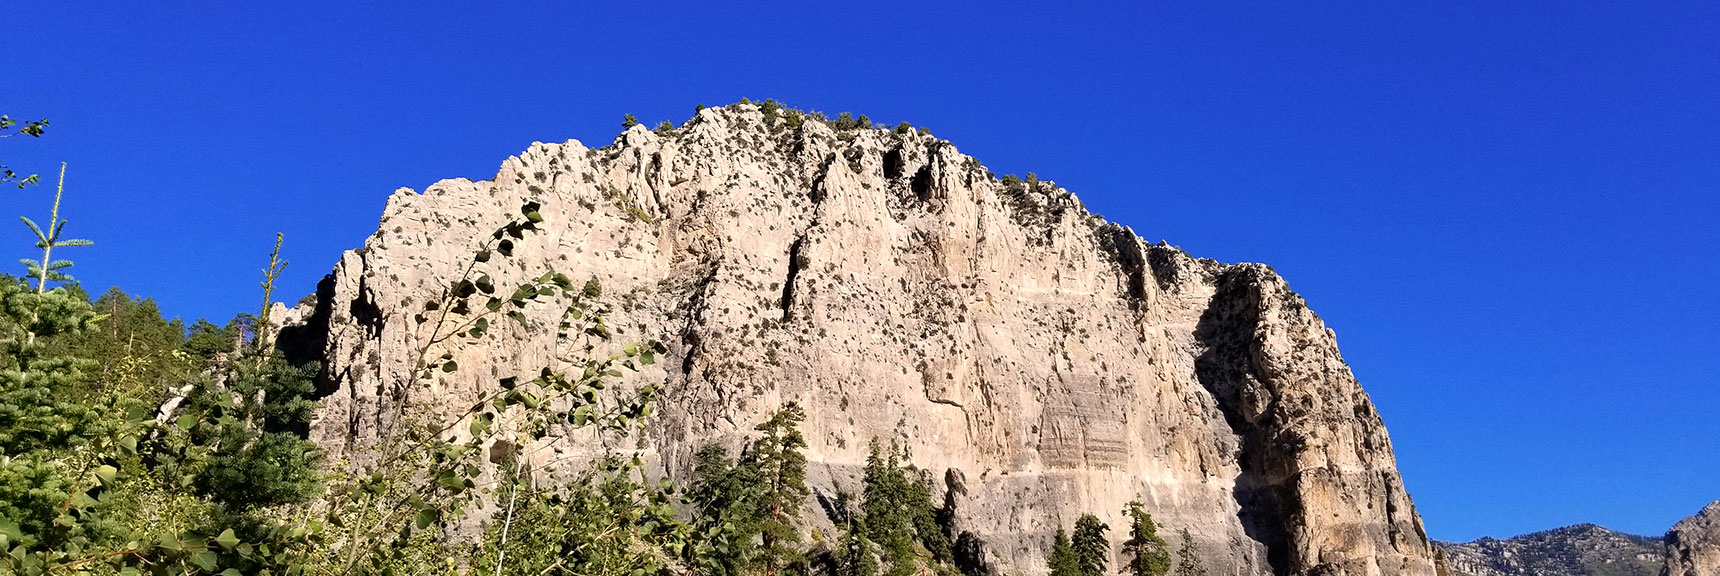 First Full View of Cathedral Rock Along Its Main Trail, Mt. Charleston Wilderness, Nevada